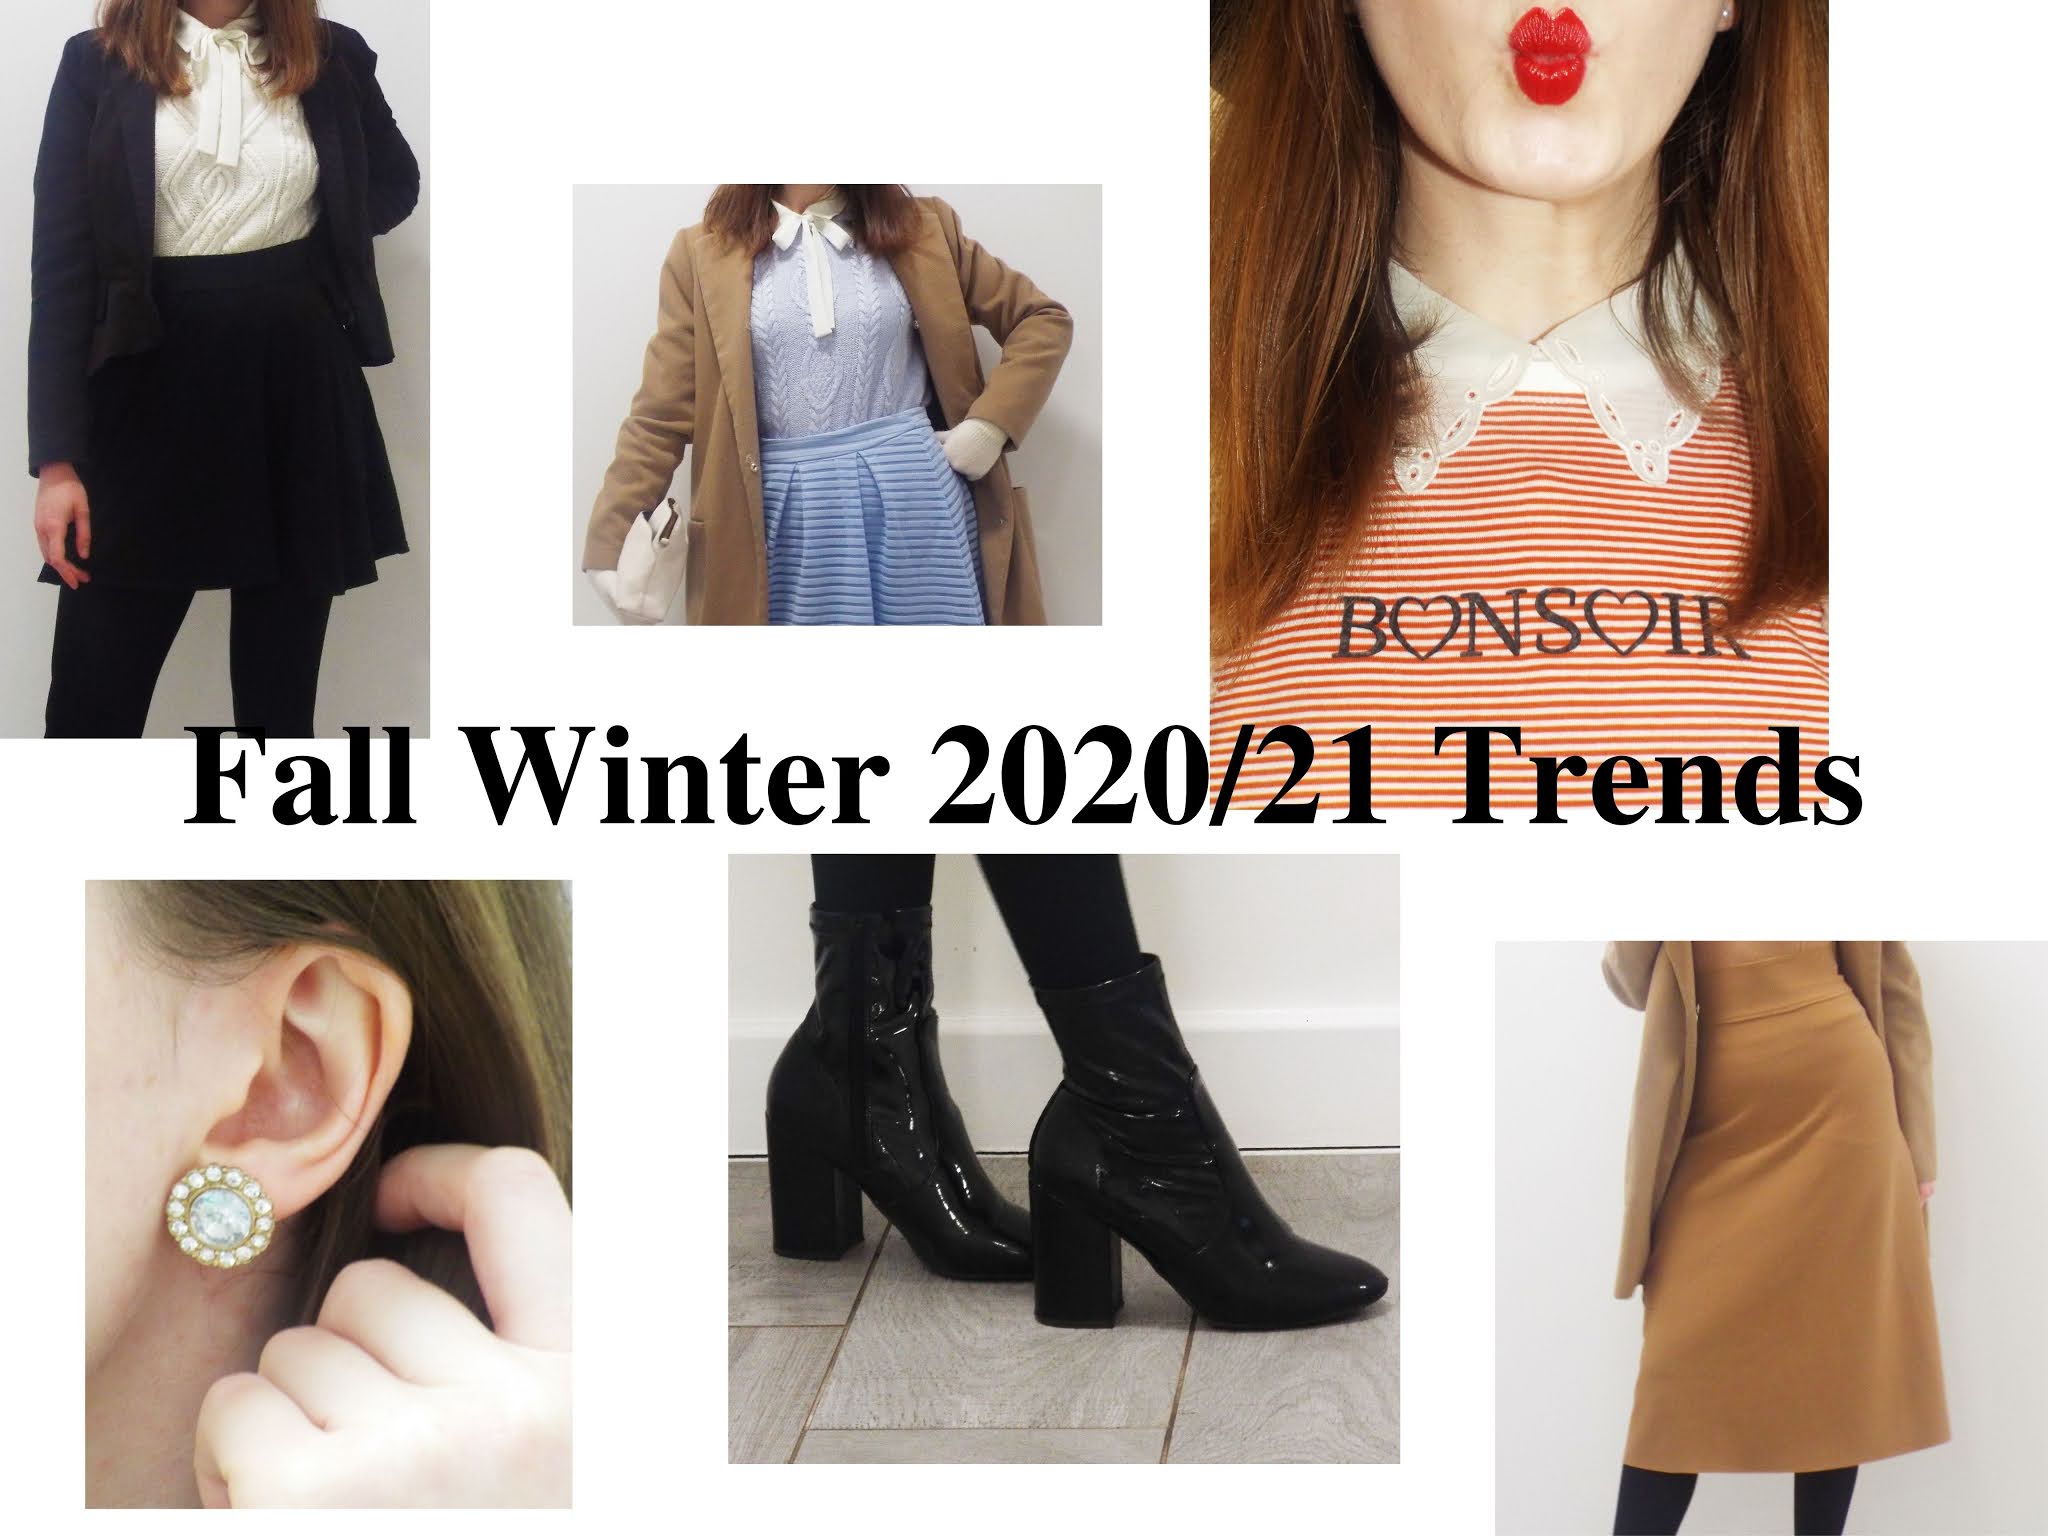 Collage of Fall Winter 2020/21 fashion trends and outfit ideas, modelled by Ellie.